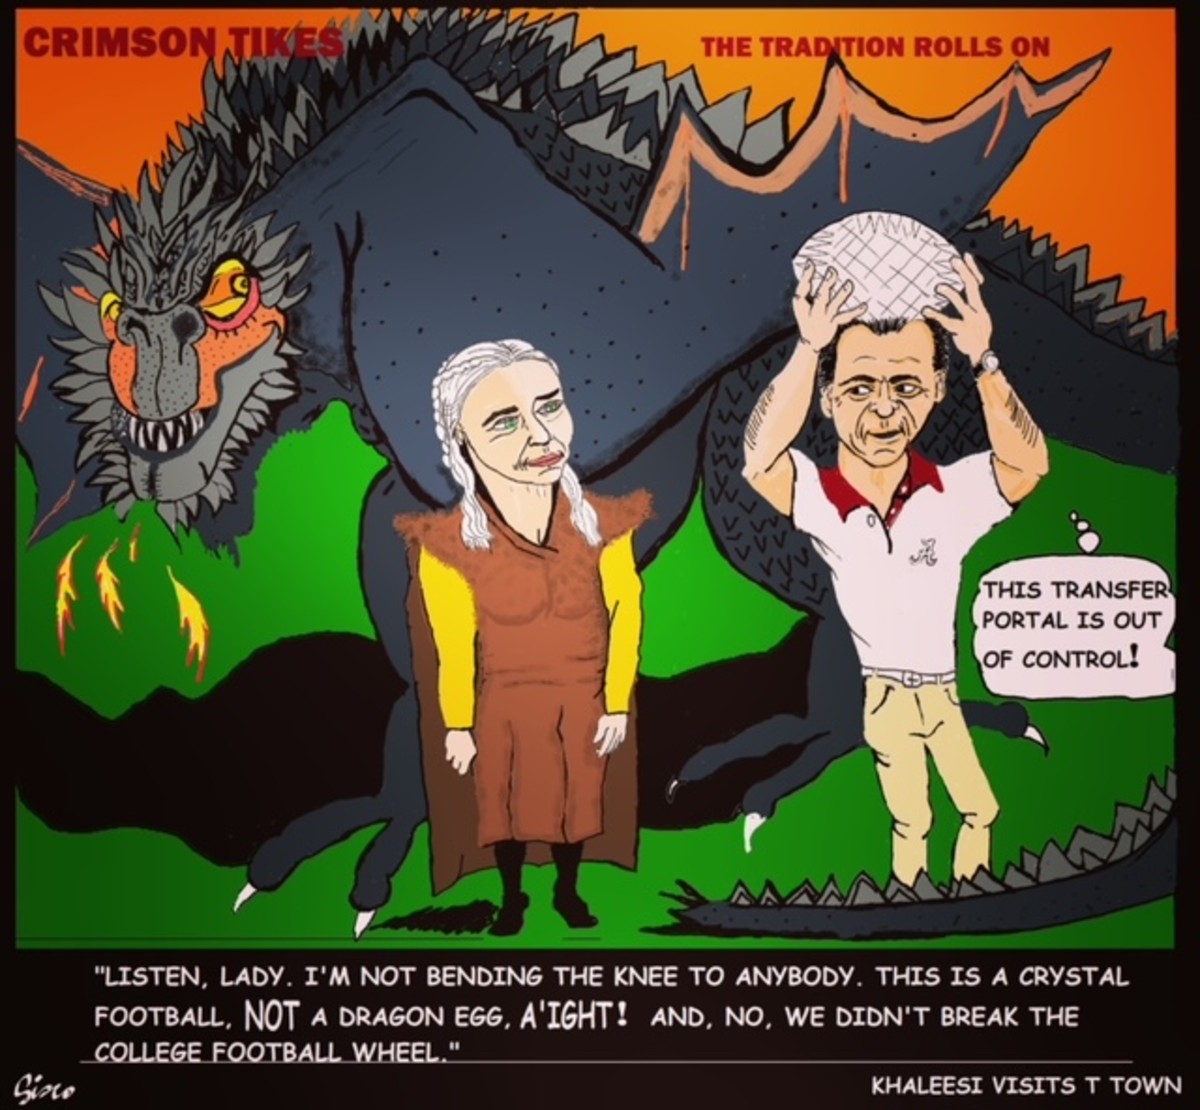 Crimson Tikes: Mother of Dragons, Meet Coach of Champions